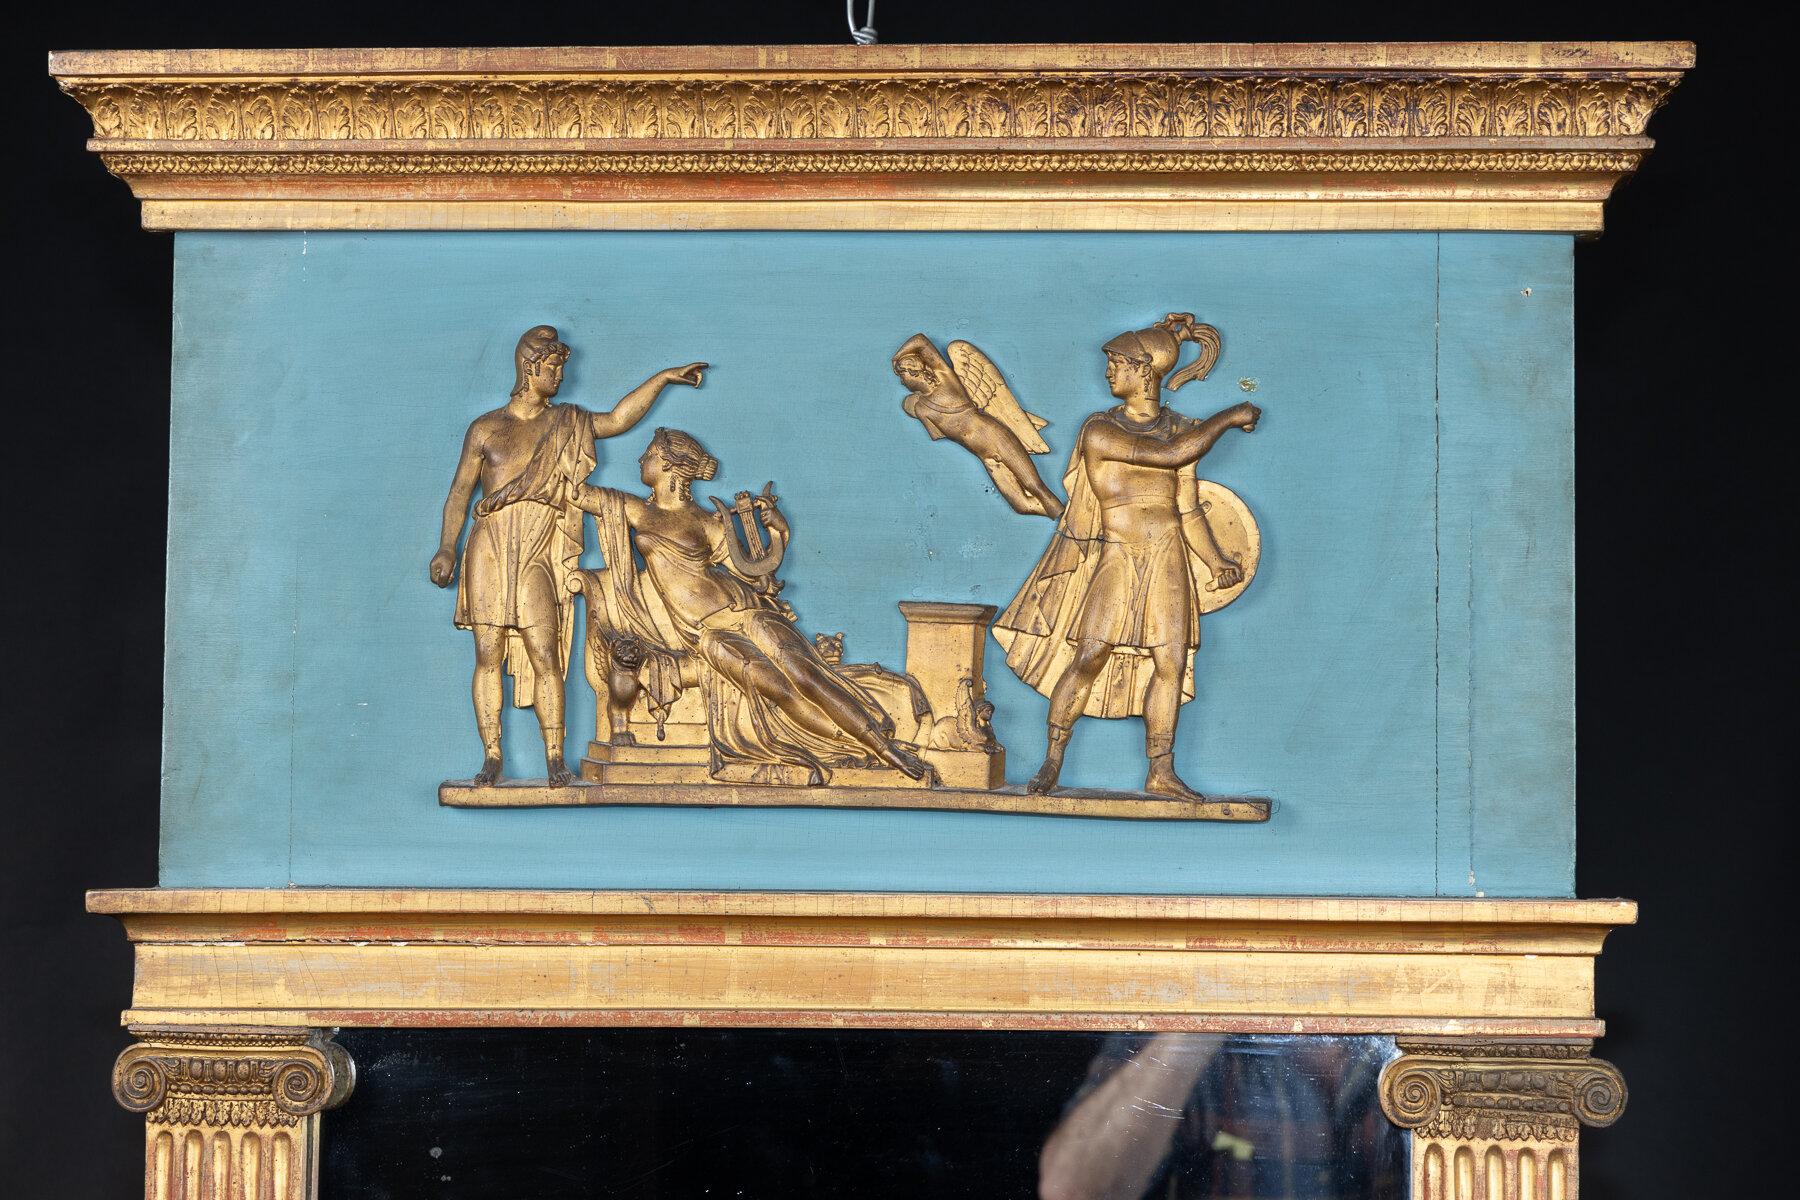 French 19th century carved, painted, and gilded Empire/Classic Revival trumeau with blue background behind gold allegorical figures. The figures rest below a top pediment of carved and gilded leaves. A fluted pilaster is seen on either side, with